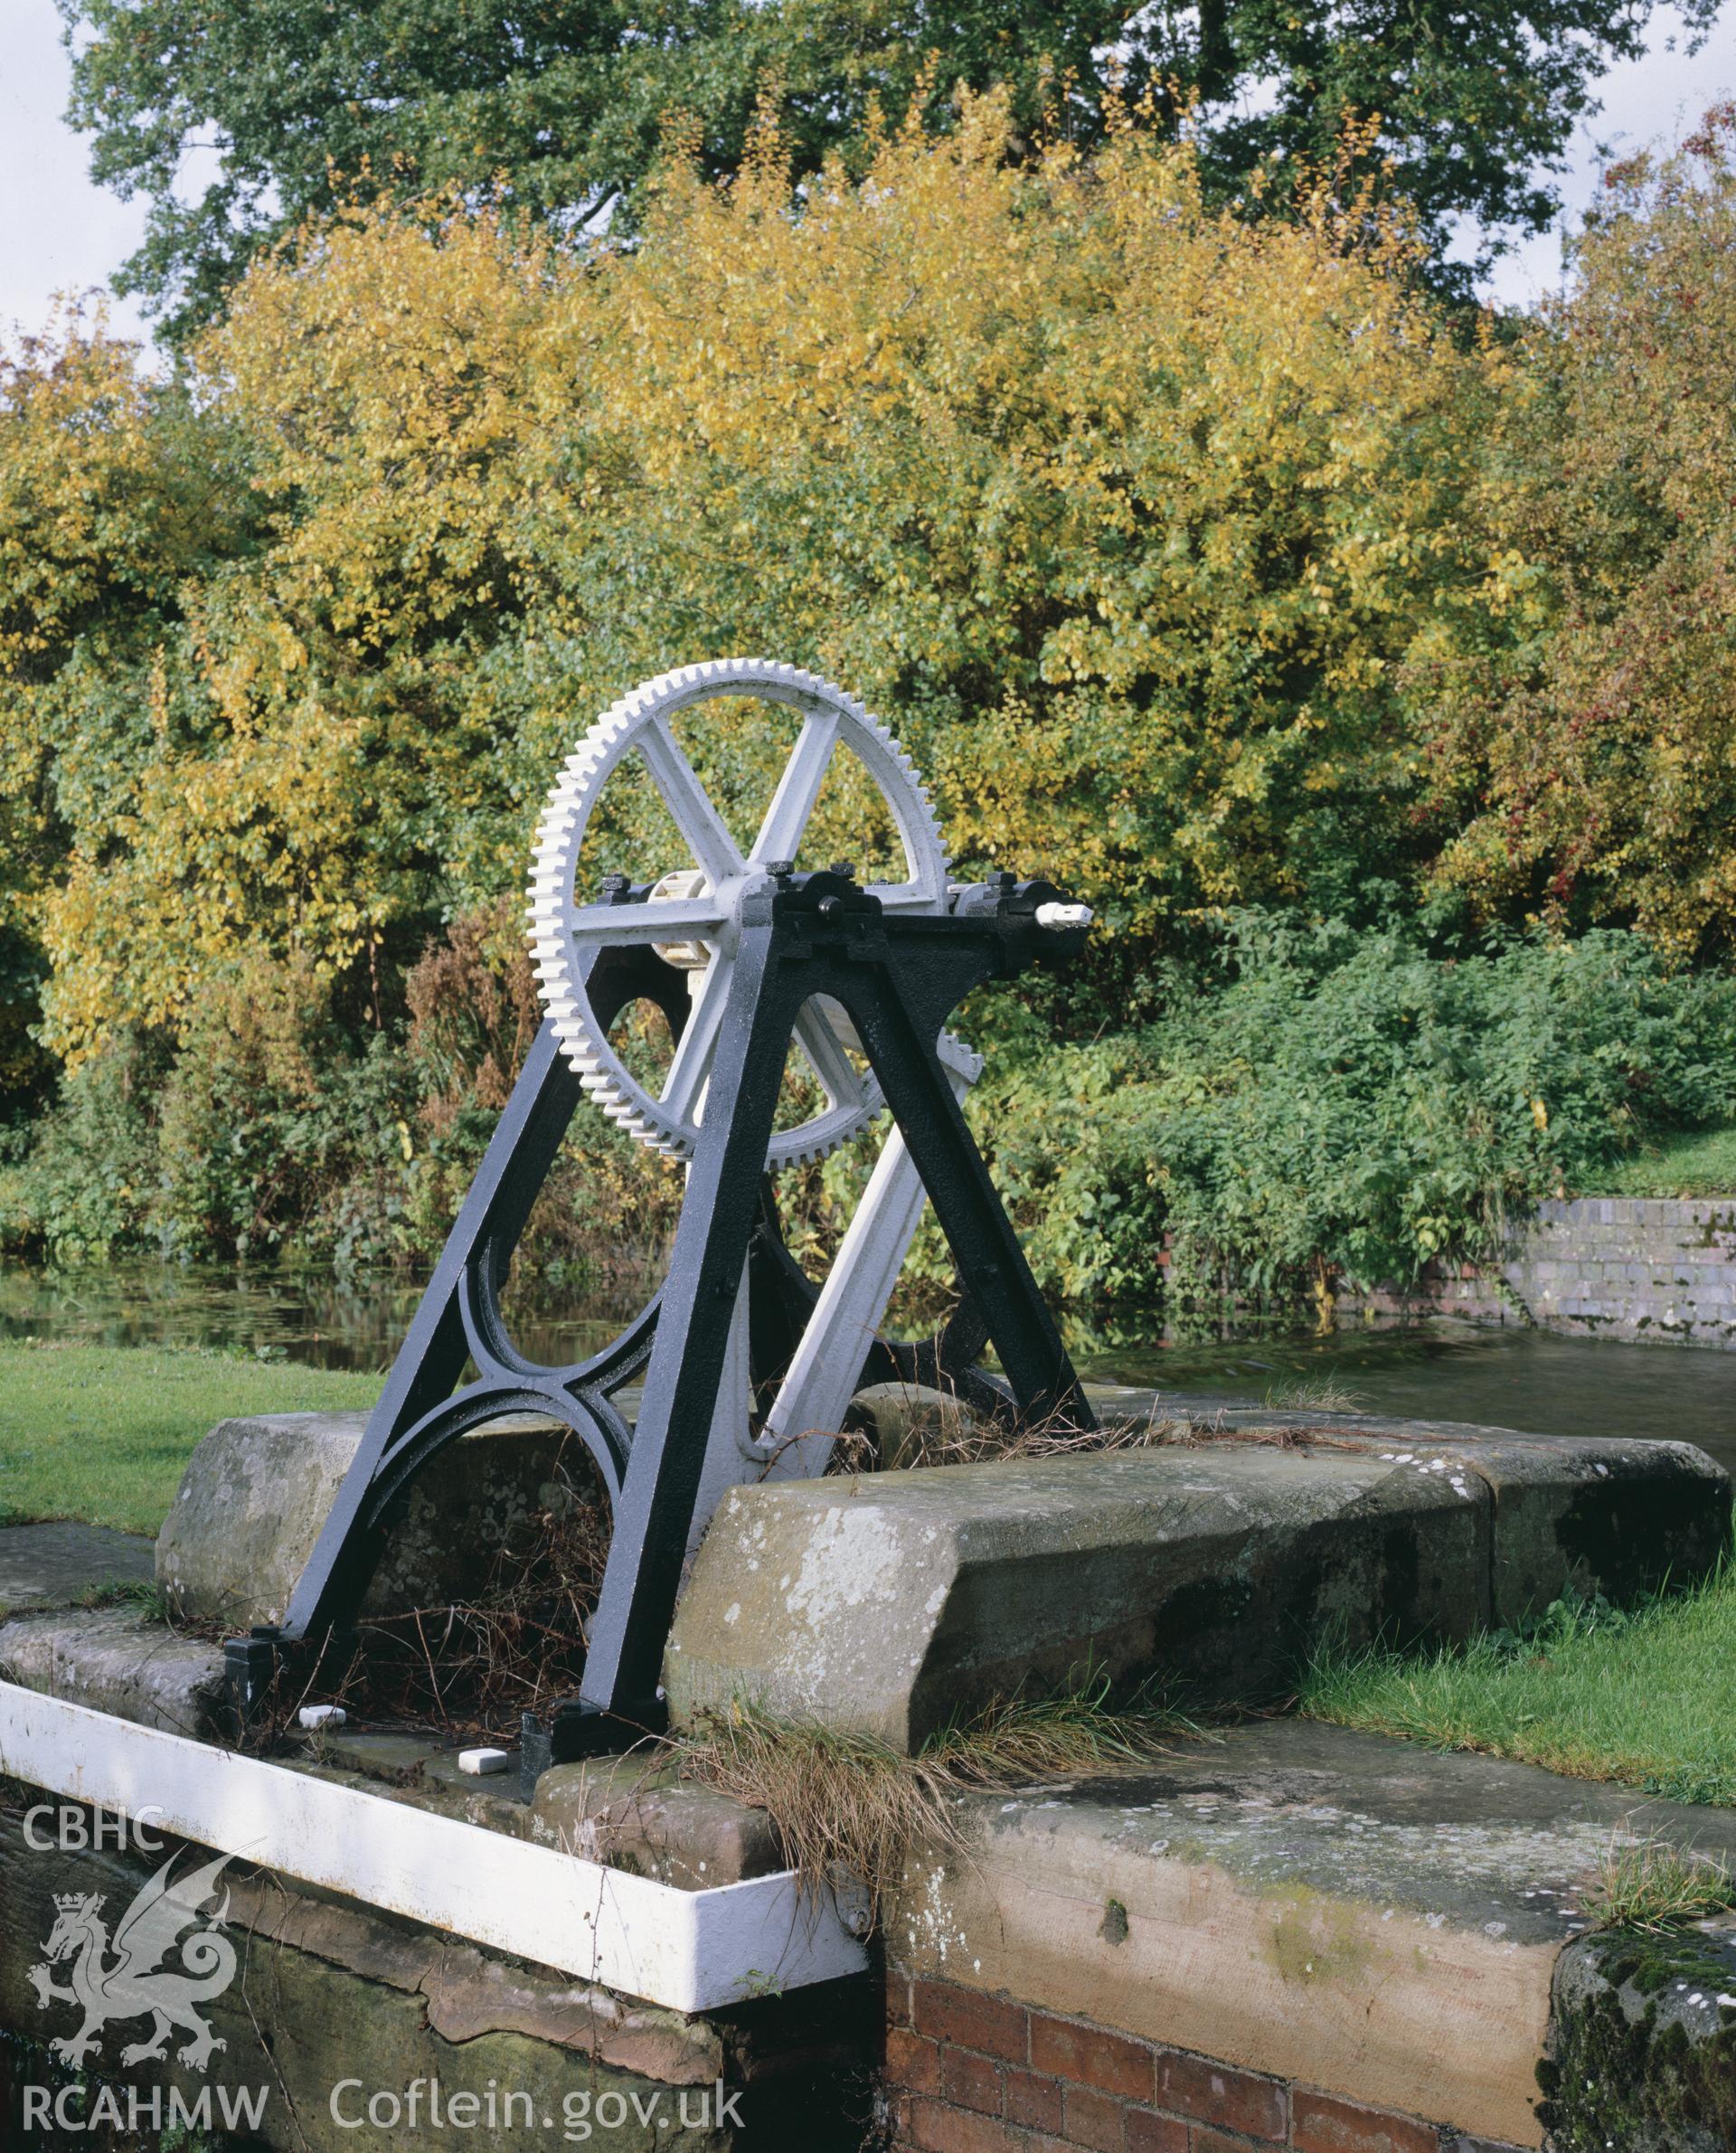 Colour transparency showing a view of the gearing mechanism at Belan Lock, Welshpool, produced by Iain Wright 1980